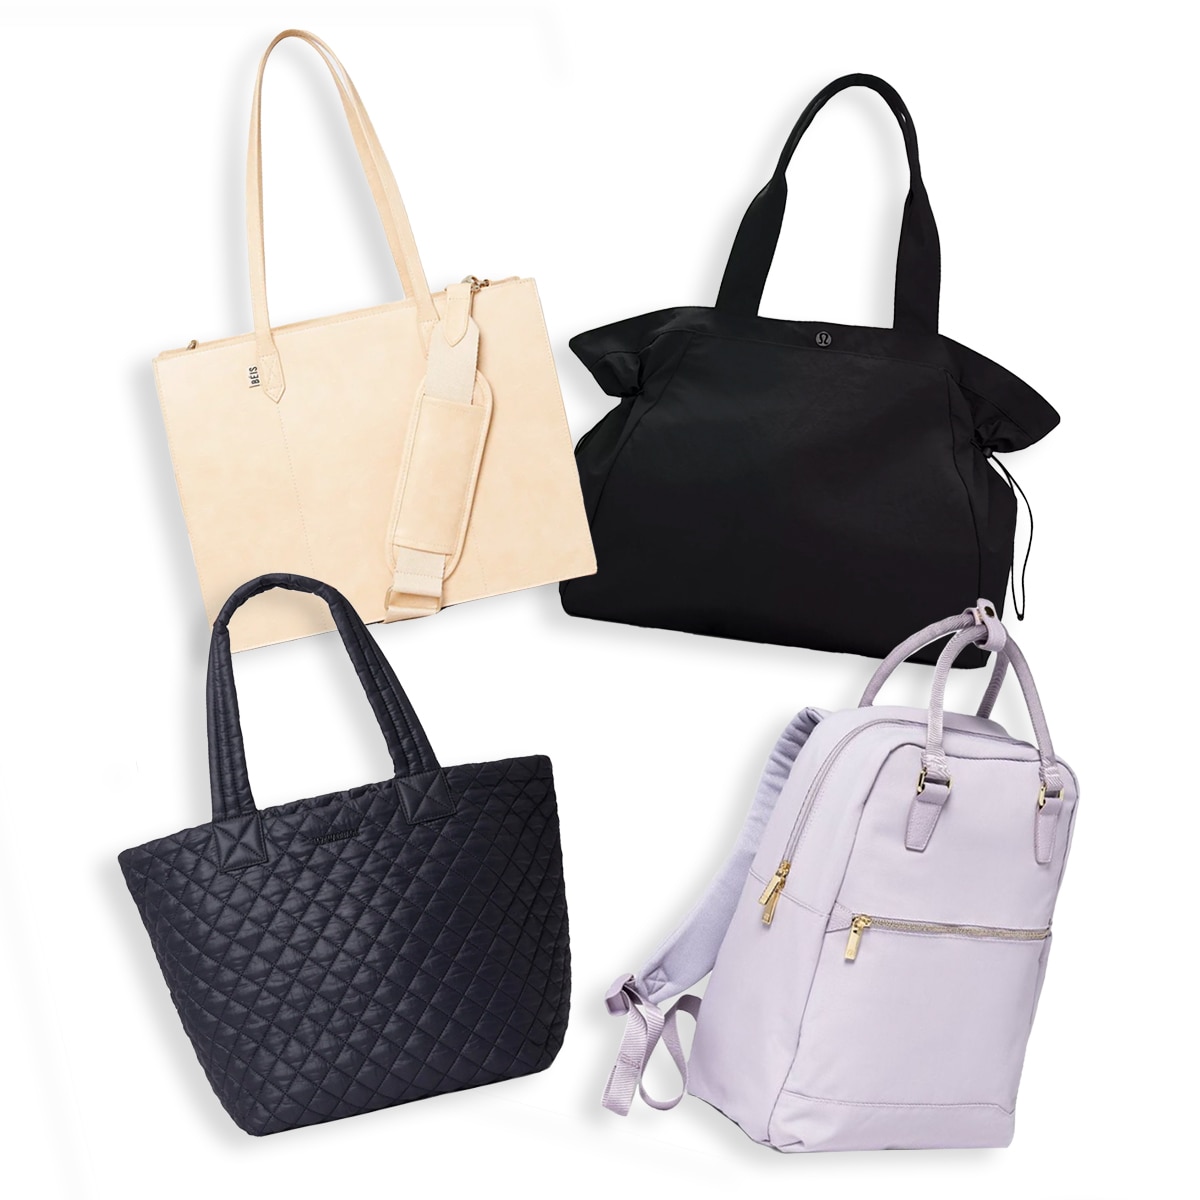 Buy College Bags for Girls Online in India